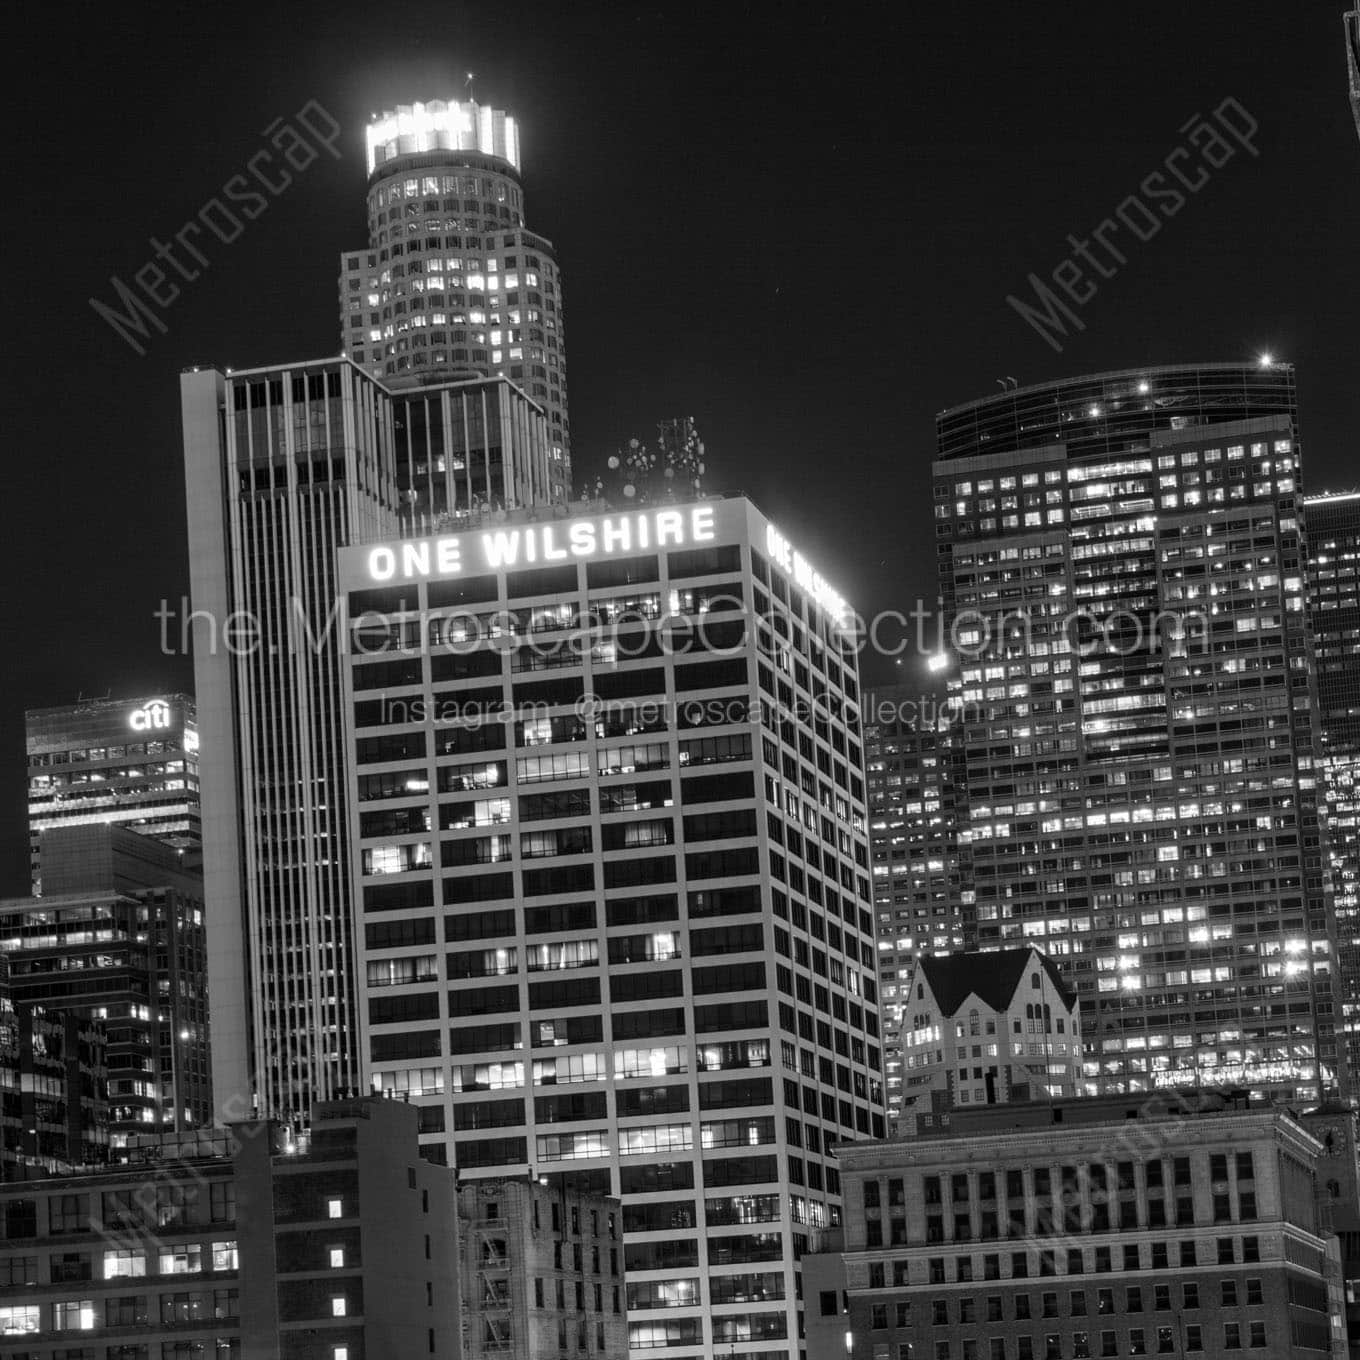 one wilshire building at night Black & White Office Art